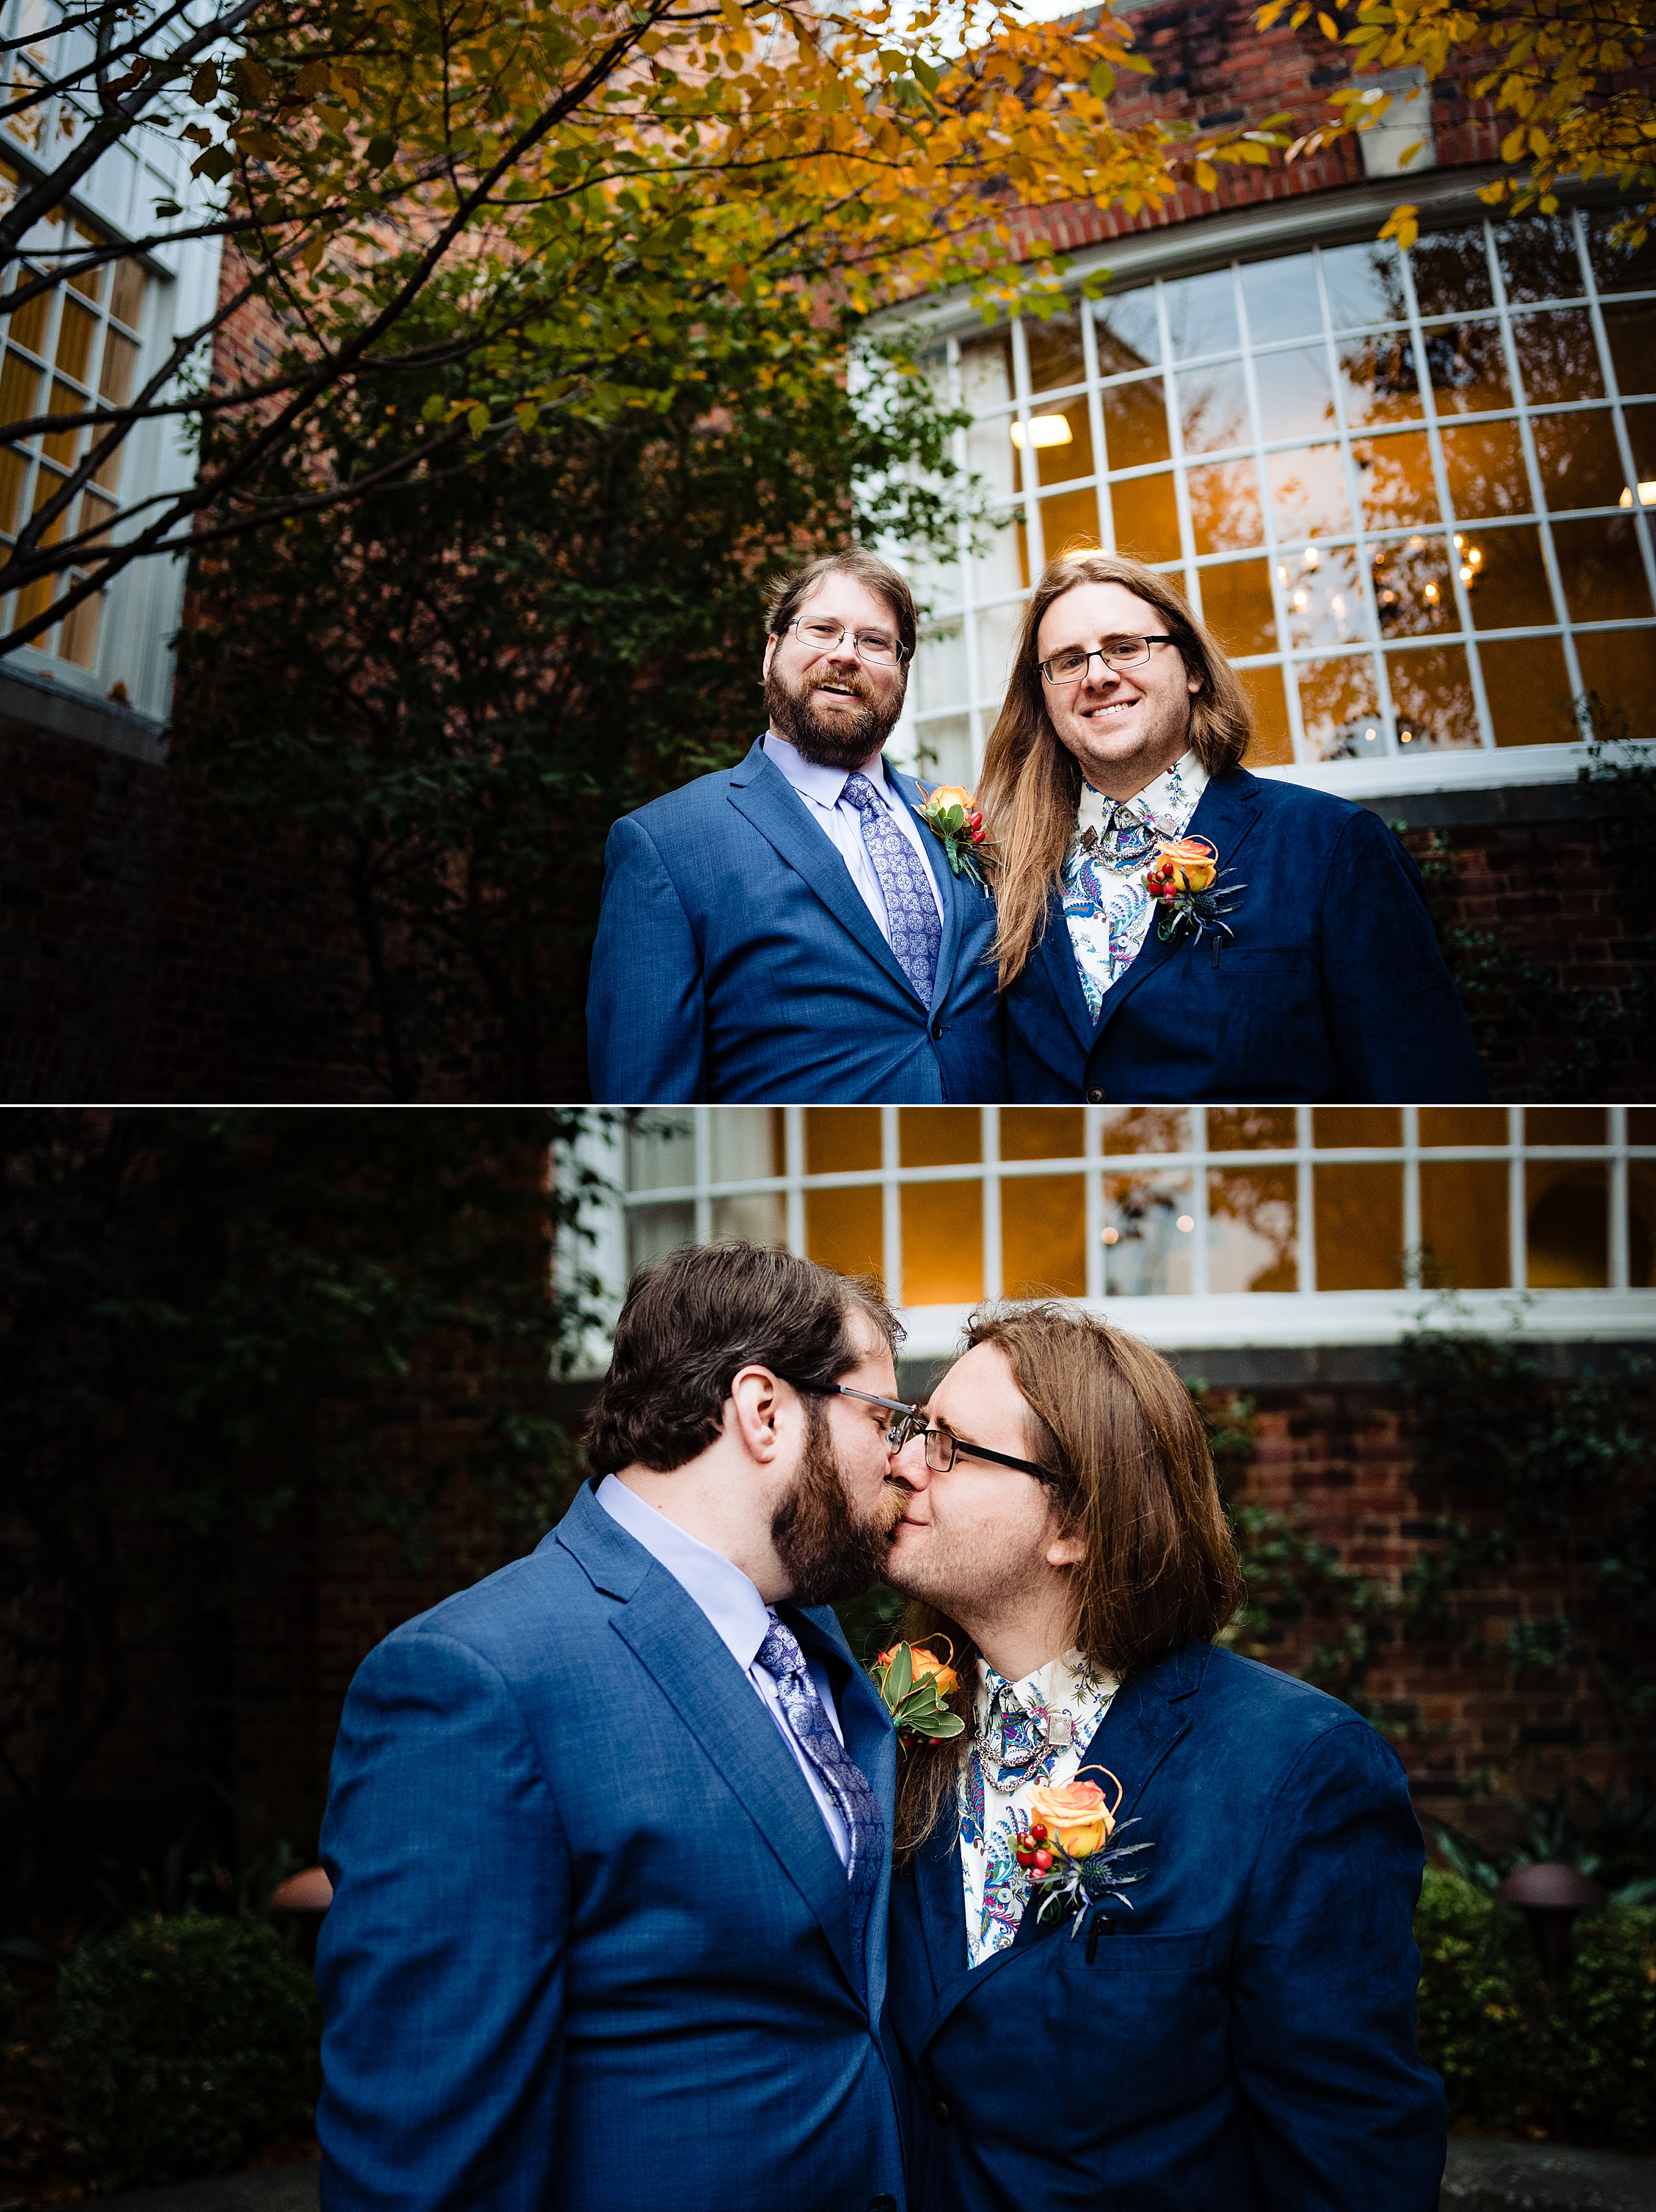 Two grooms smile and kiss after their intimate same-sex wedding in Chapel Hill, NC